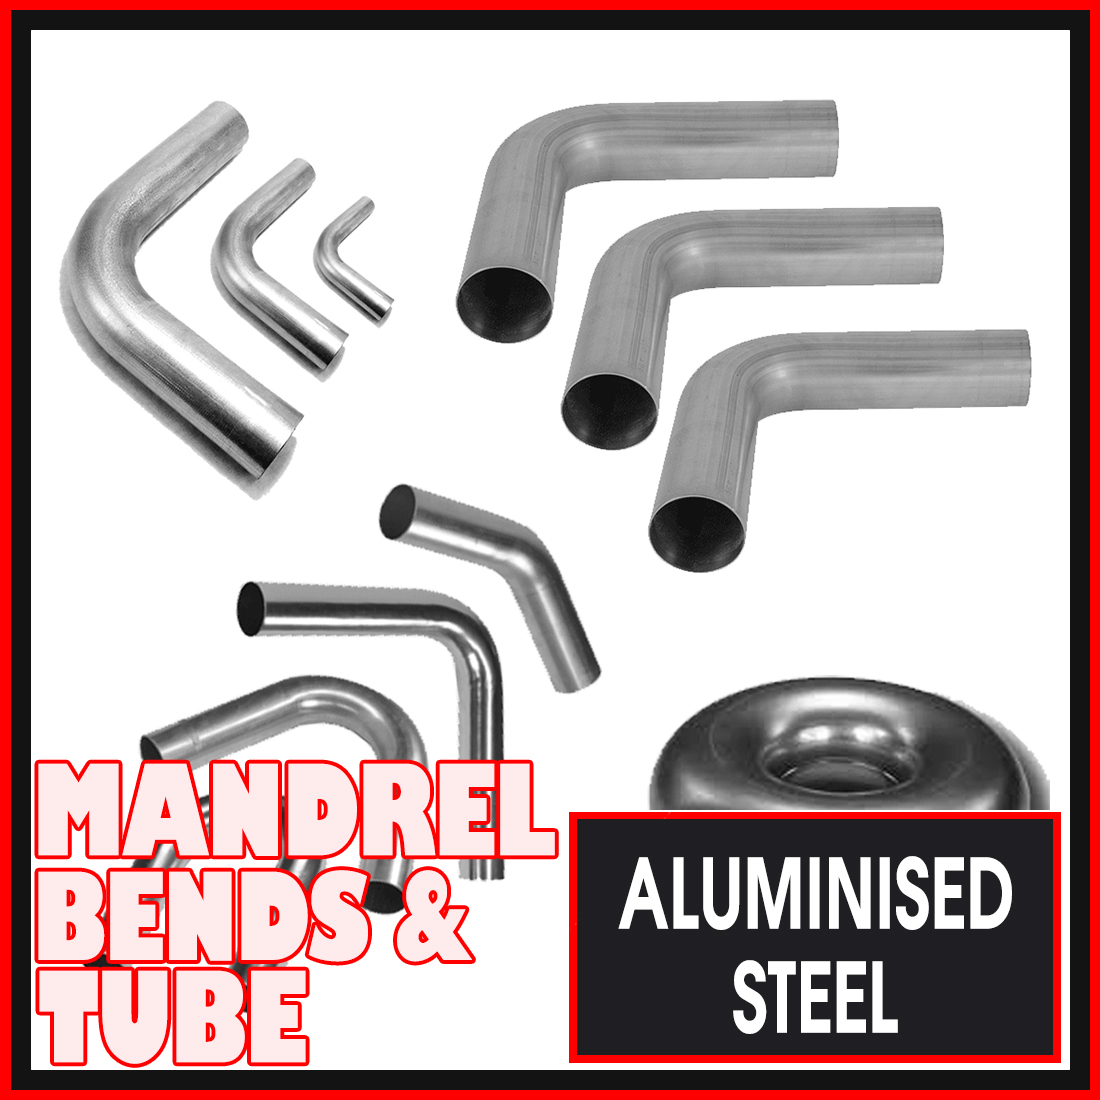 2 1/2" Aluminised Mild Steel Mandrel Bends and Exhaust Pipe image